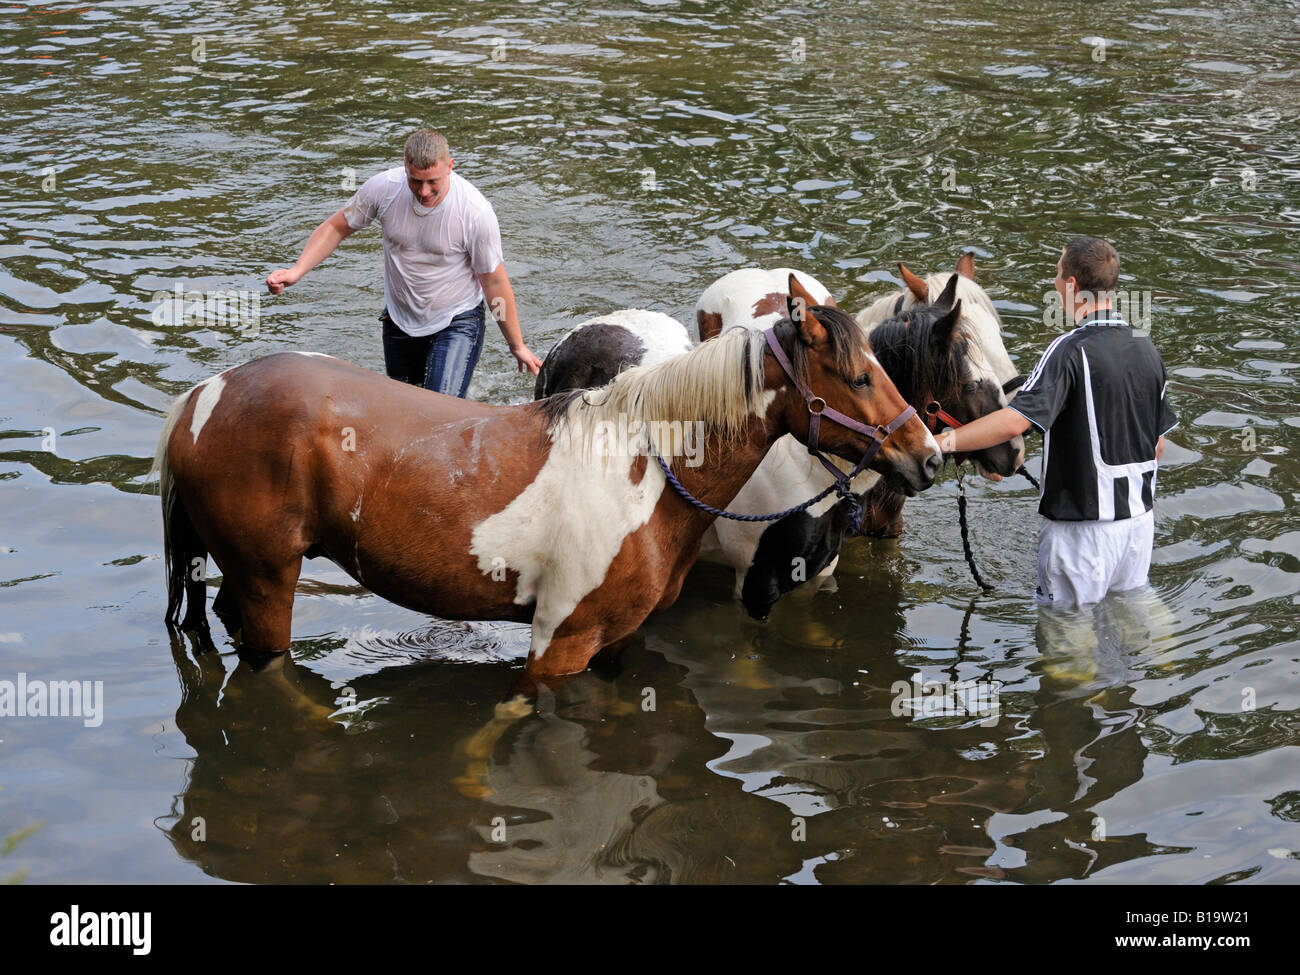 Gypsy travellers washing horses in River Eden. Appleby Horse Fair. Appleby-in-Westmorland, Cumbria, England, United Kingdom. Stock Photo